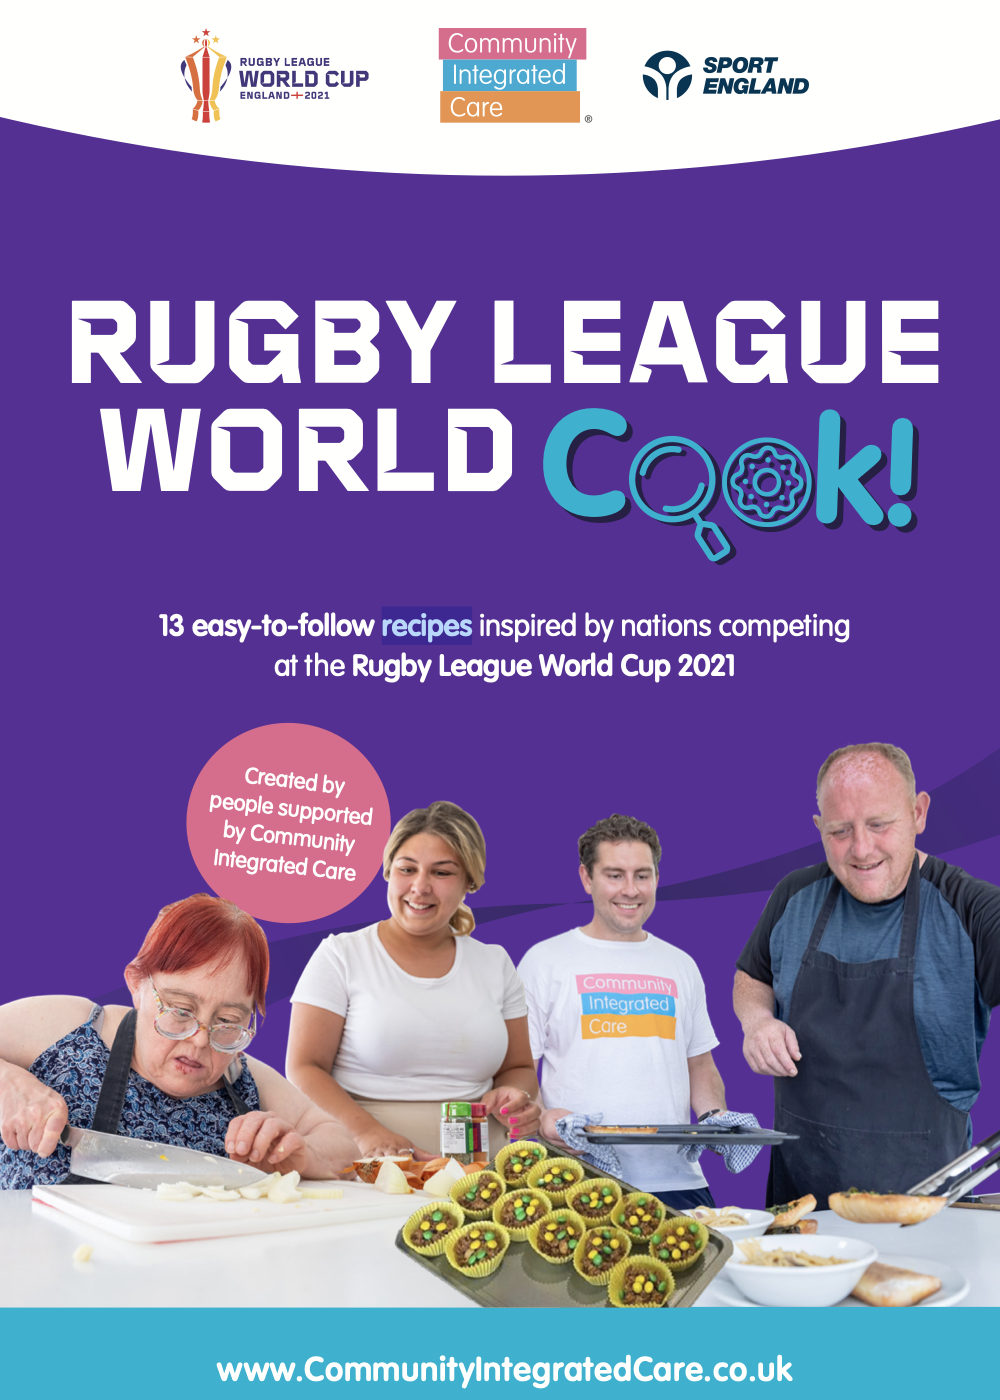 Rugby League World Cookbook’ created by people with learning disabilities featured image